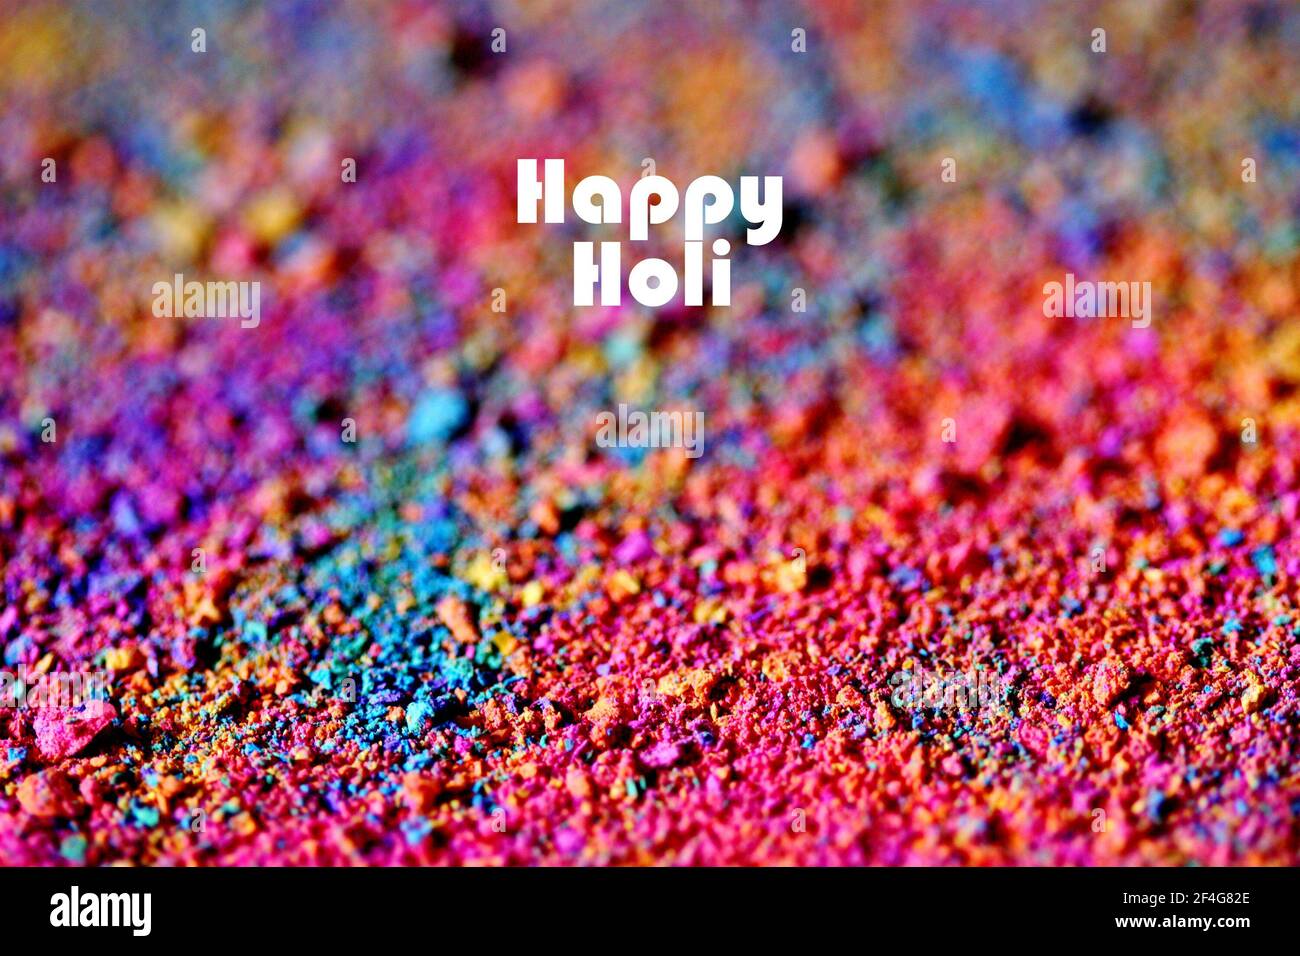 Festival of colors - HOLI, a colorful background Stock Photo - Alamy